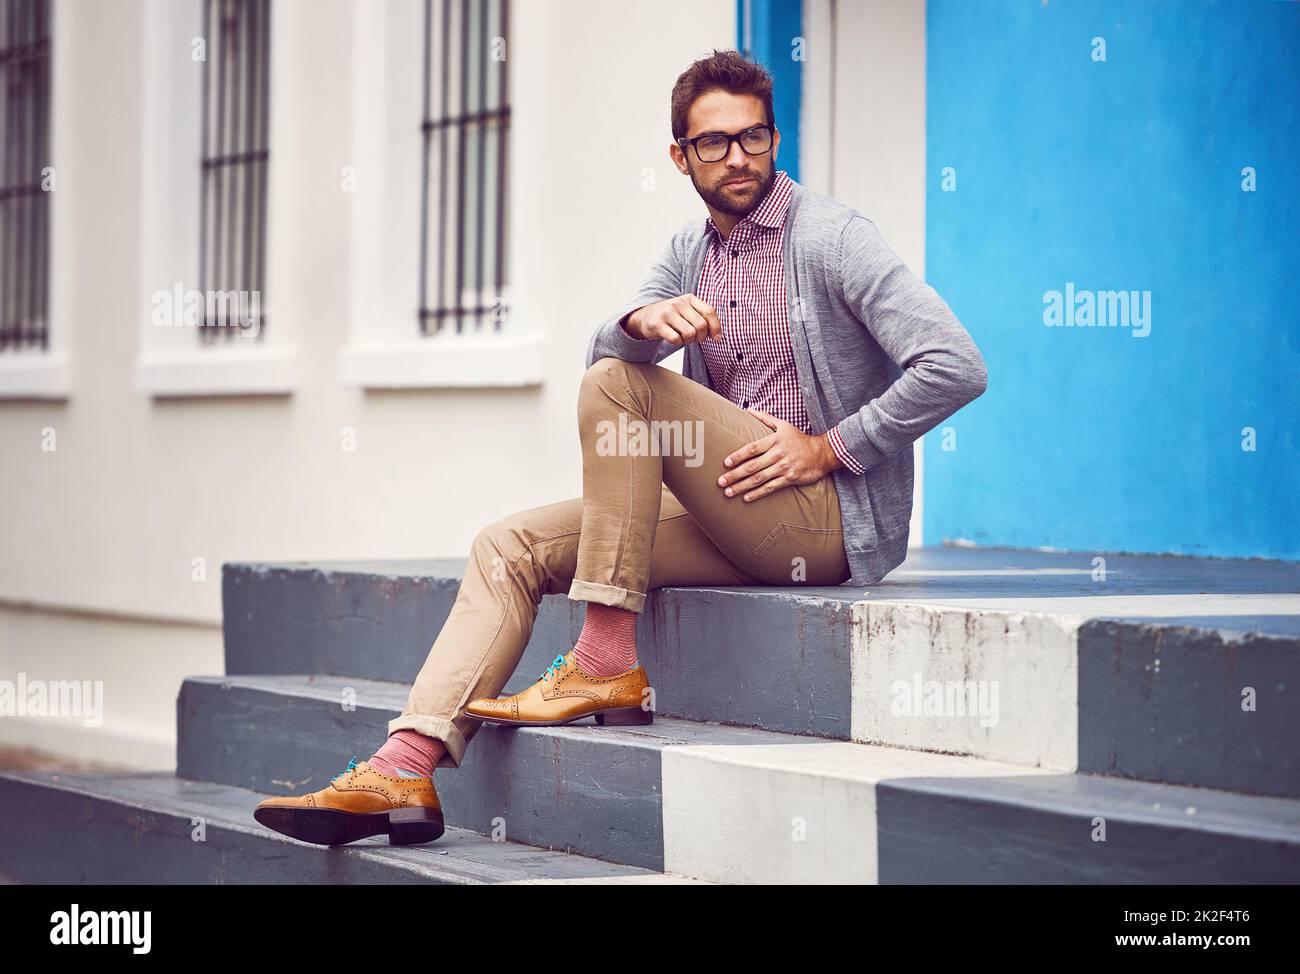 Sometimes the streets of the city are my inspiration. Shot of a handsome young man seated on steps outside in the city while being in deep thought. Stock Photo